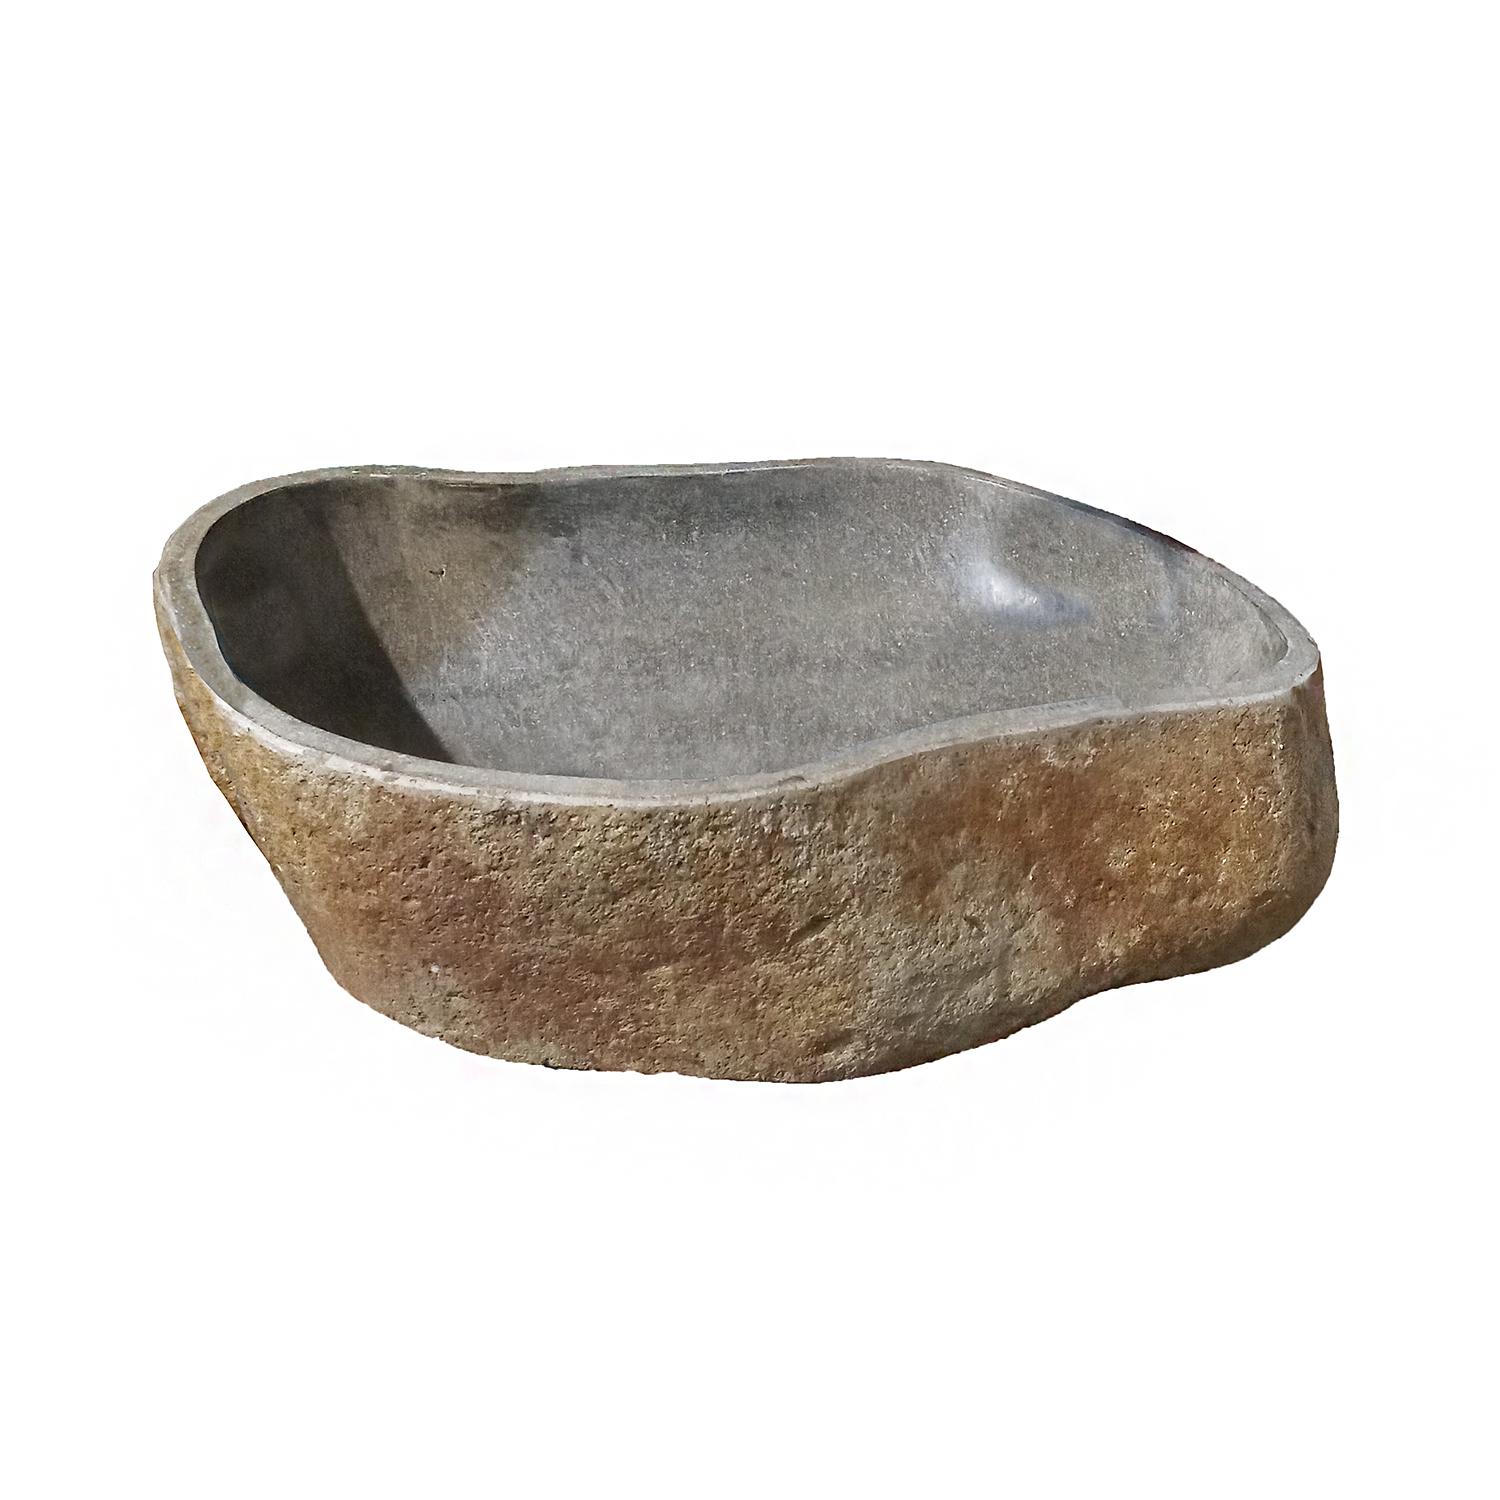 Stone Sink or Basin from Indonesia 5